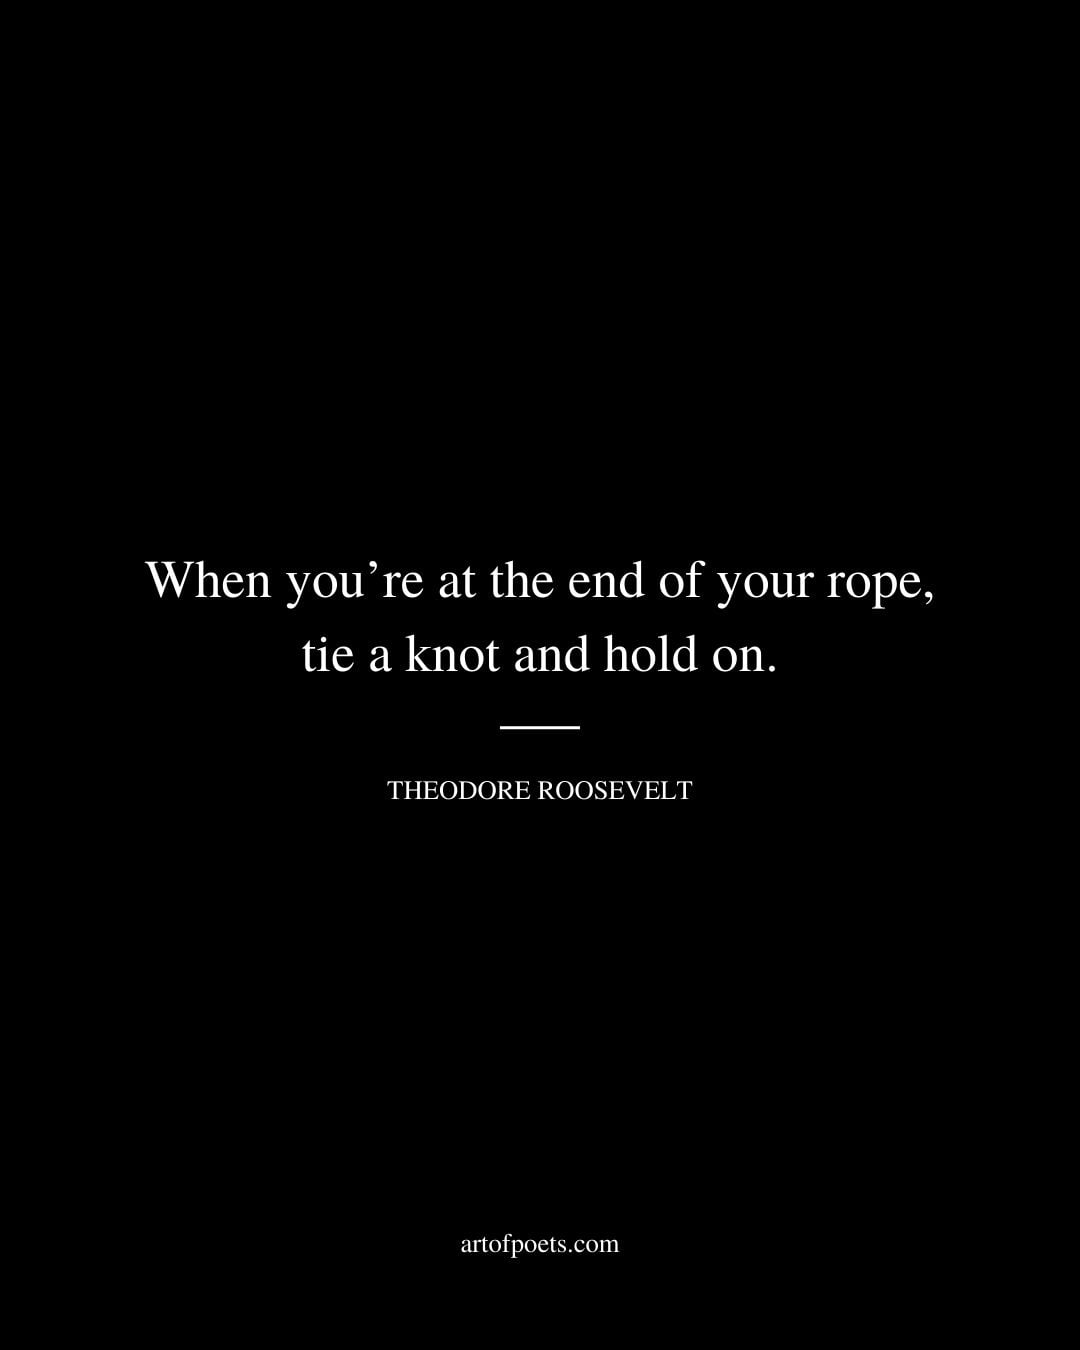 When youre at the end of your rope tie a knot and hold on. –Theodore Roosevelt